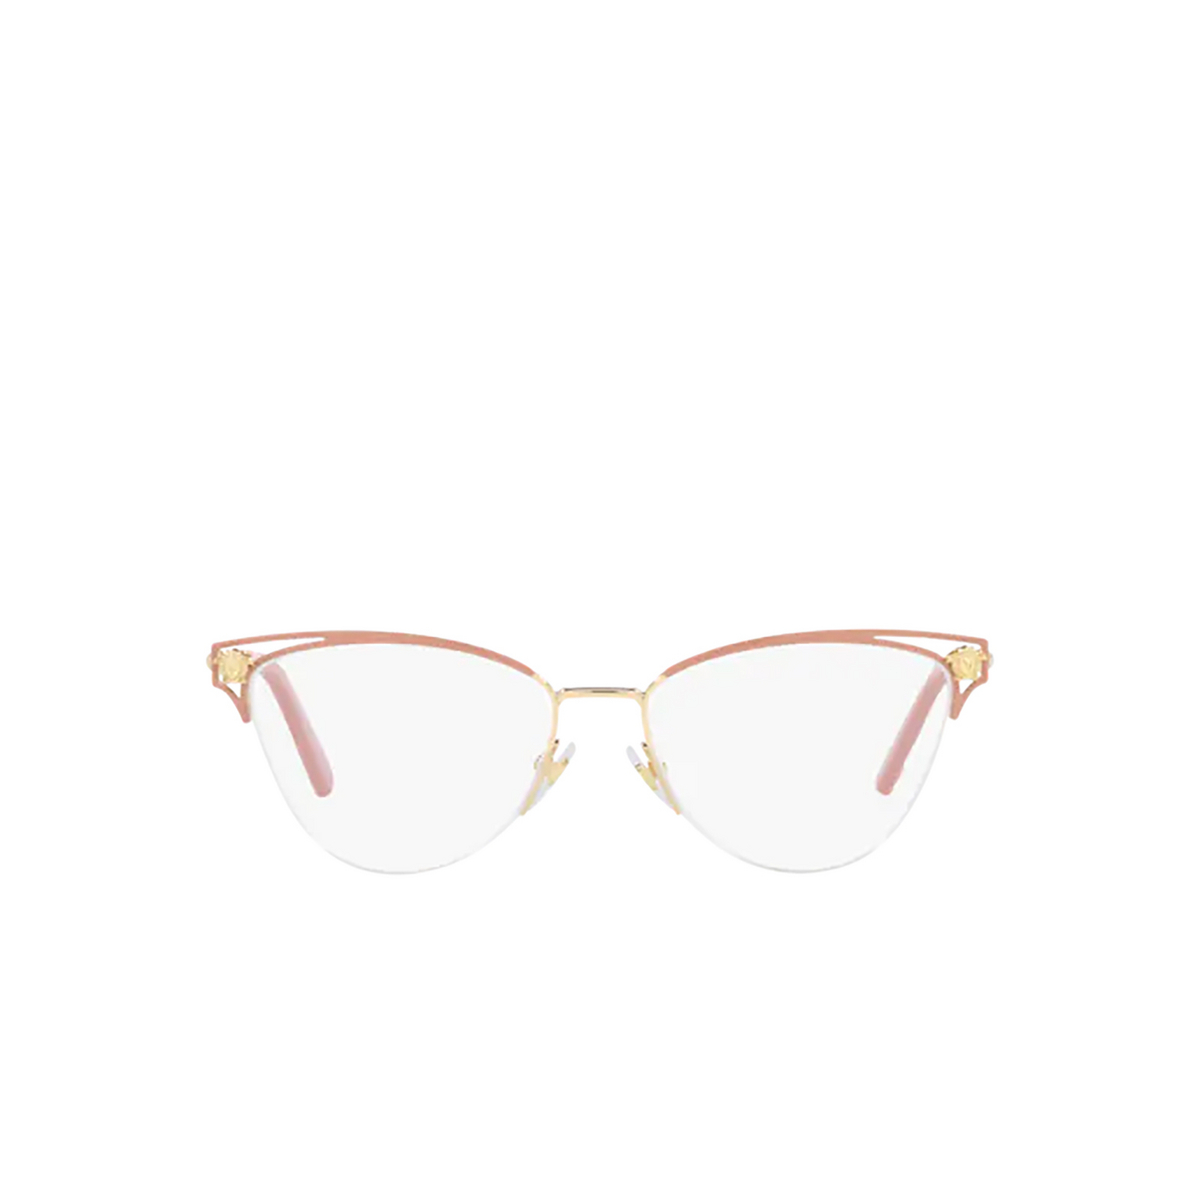 Versace VE1280 Eyeglasses 1481 Gold / Pink - front view